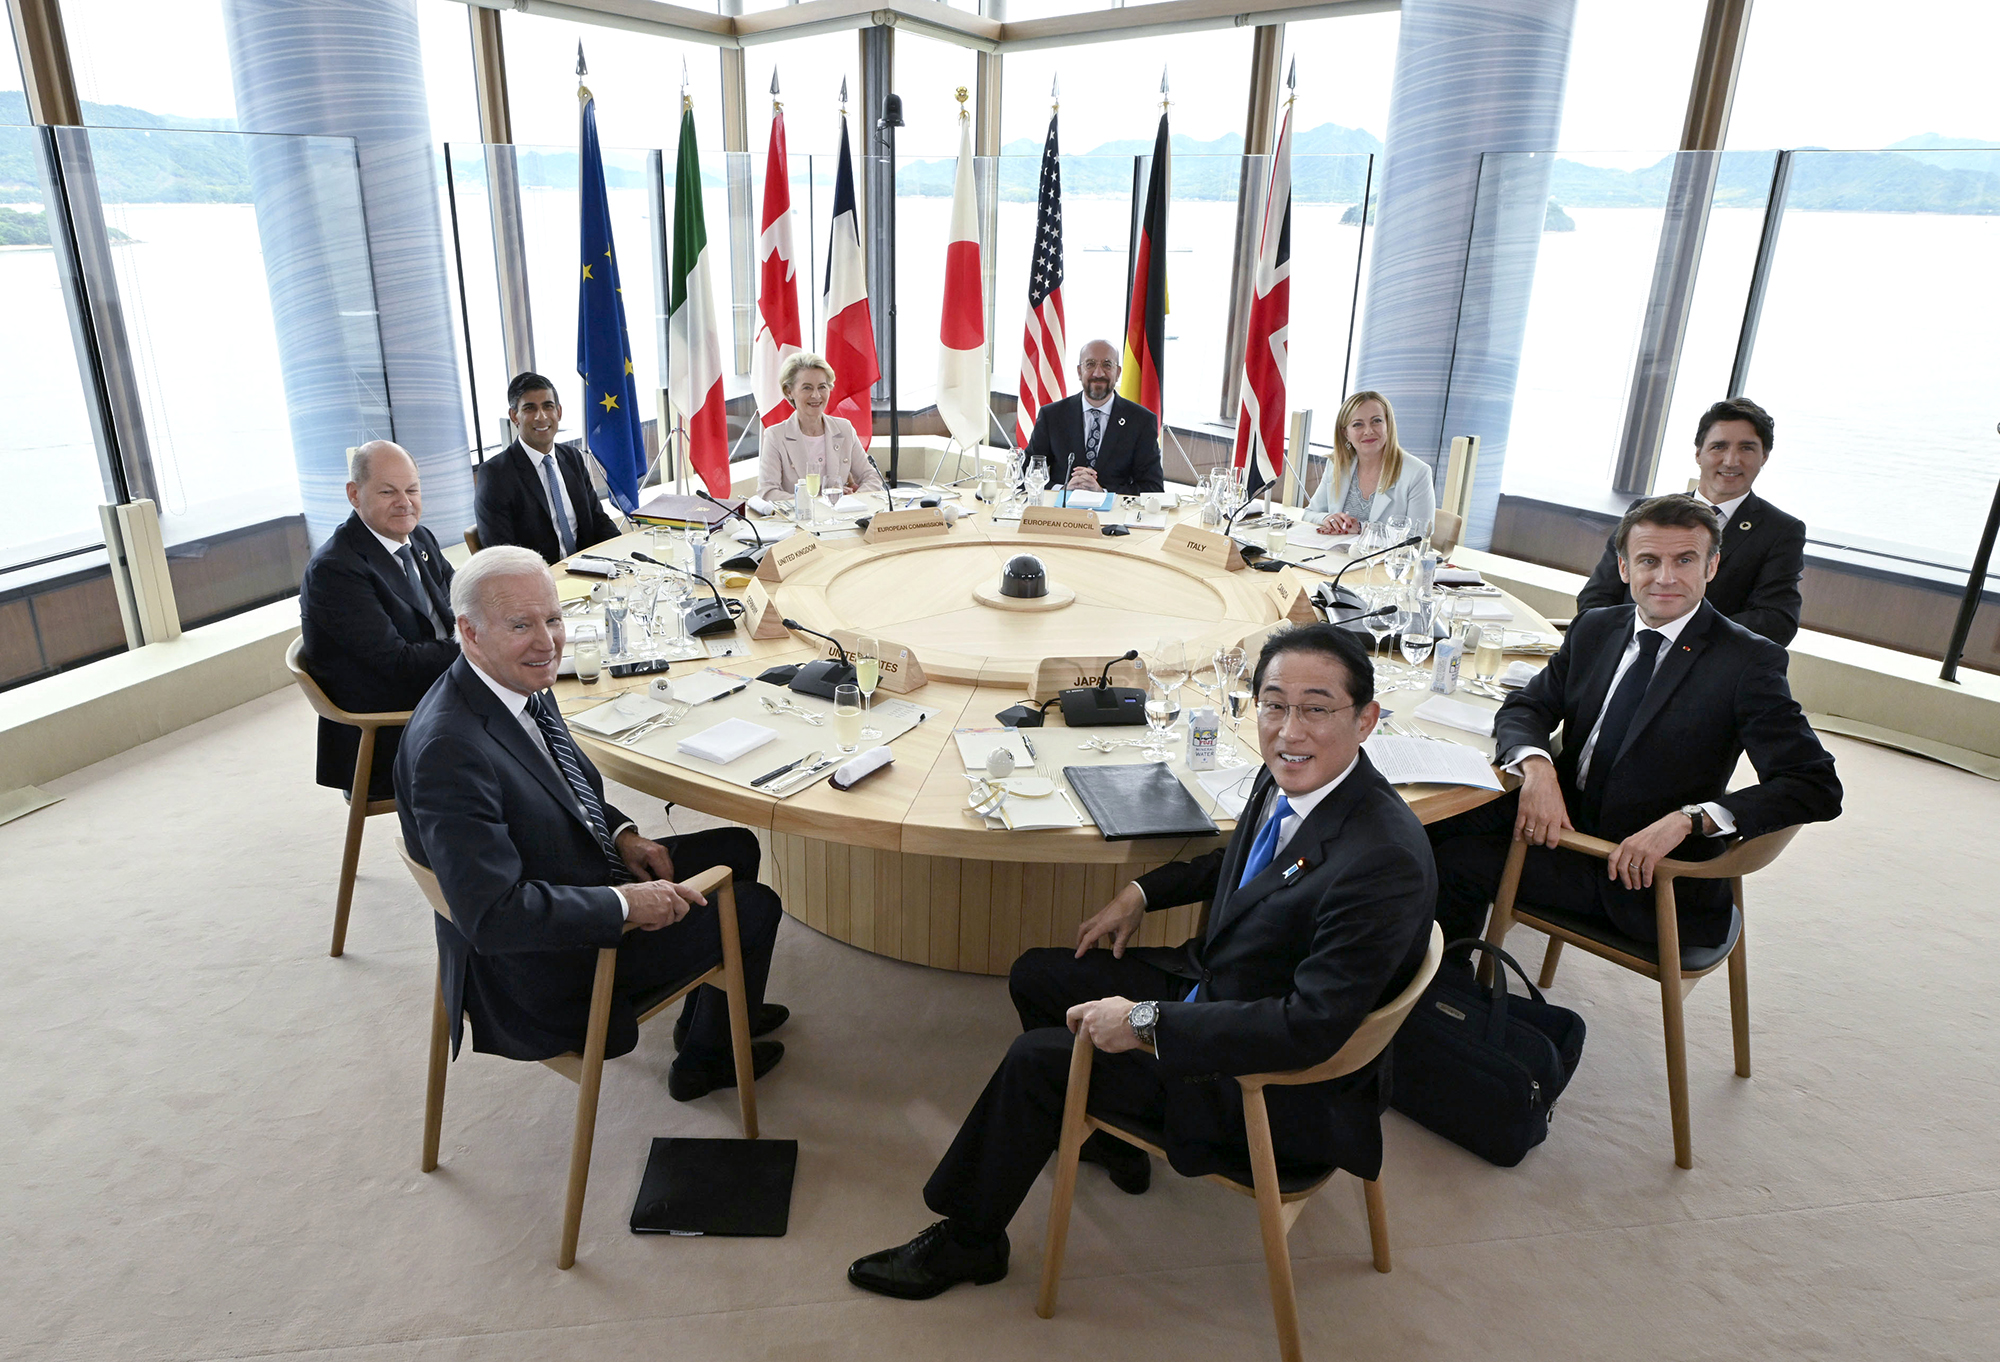 Leaders of the Group of Seven industrialized economies attend the first day of their three-day summit on May 19, 2023, in the western Japan city of Hiroshima. Pictured clockwise from front right are Japanese Prime Minister Fumio Kishida, U.S. President Joe Biden, German Chancellor Olaf Scholz, British Prime Minister Rishi Sunak, European Commission President Ursula von der Leyen, European Council President Charles Michel, Italian Prime Minister Giorgia Meloni, Canadian Prime Minister Justin Trudeau and French President Emmanuel Macron.